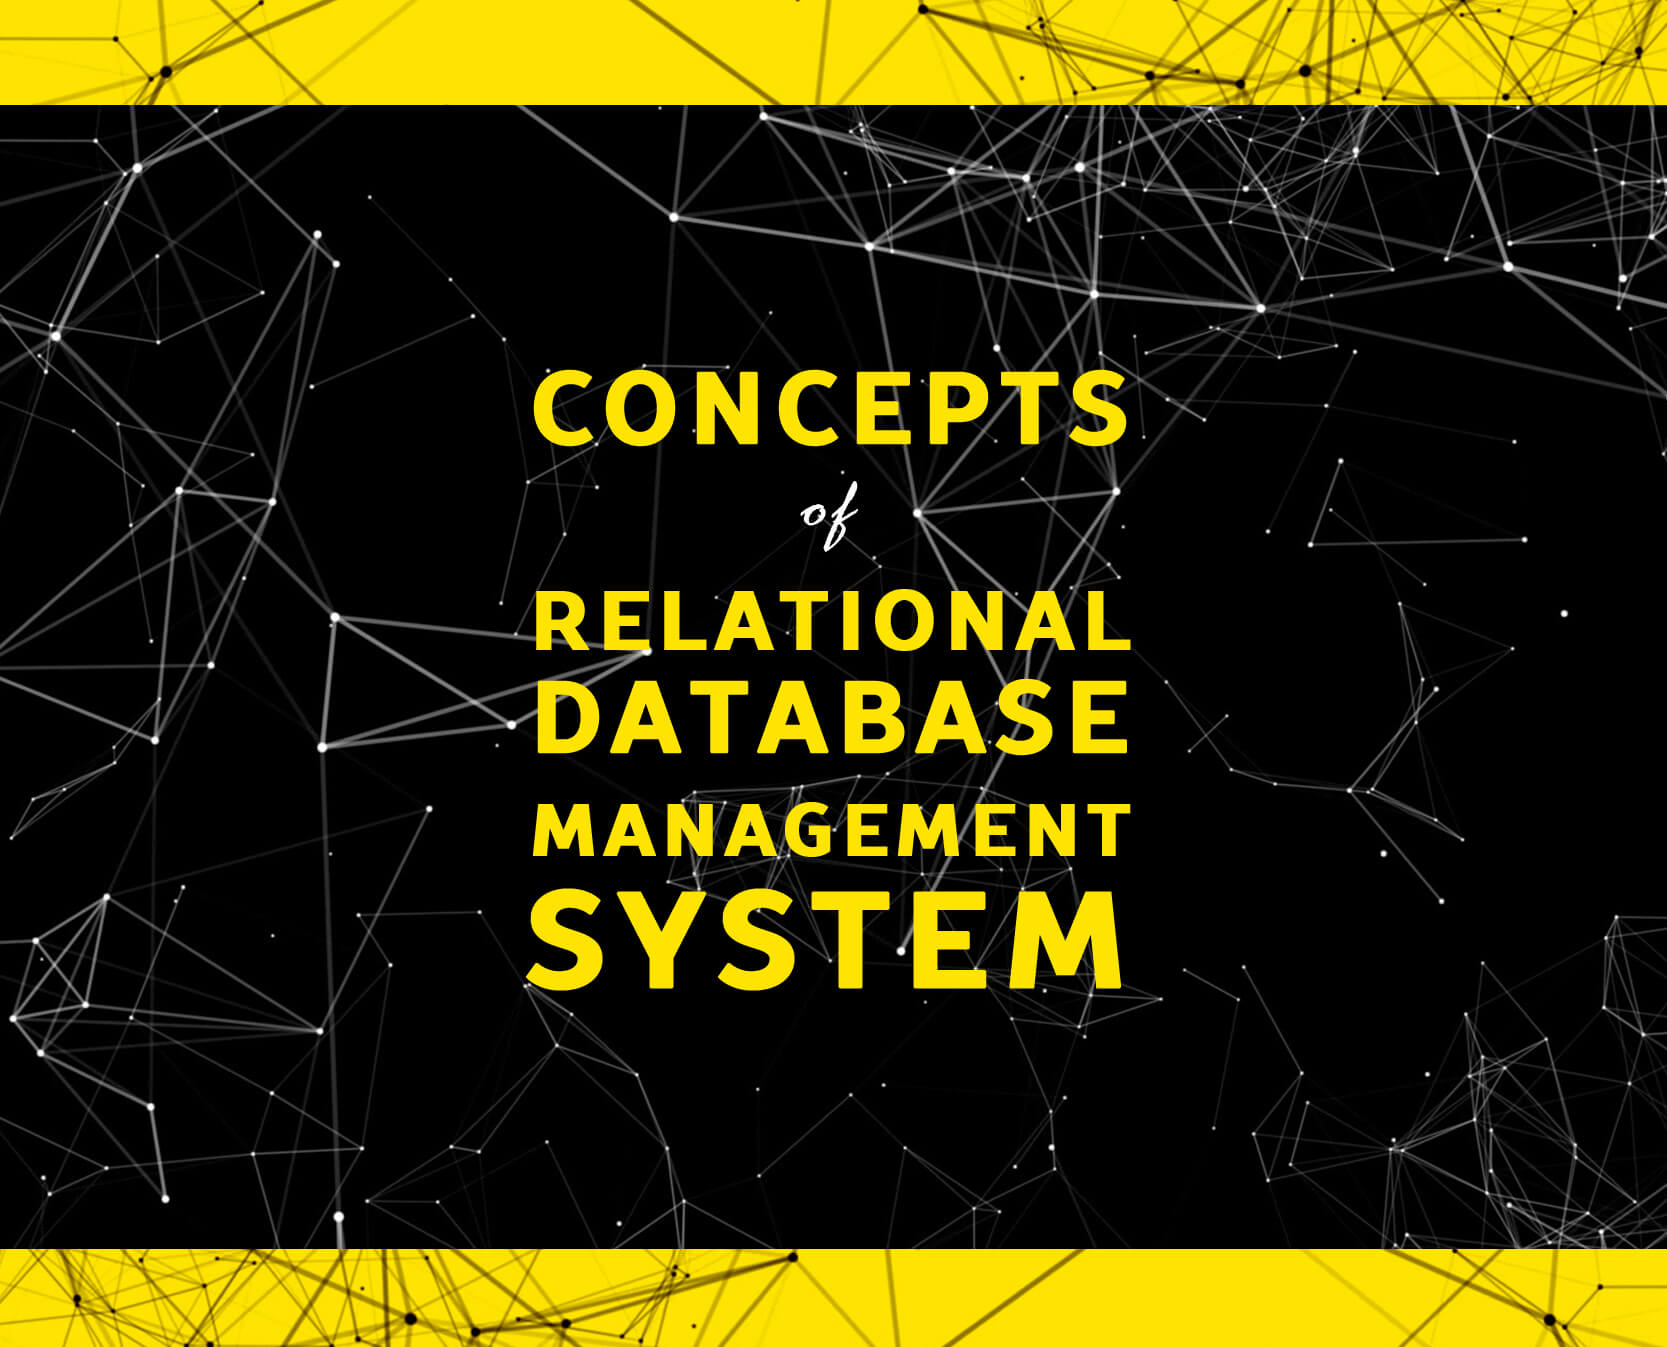 Concepts of Relational Database Management System